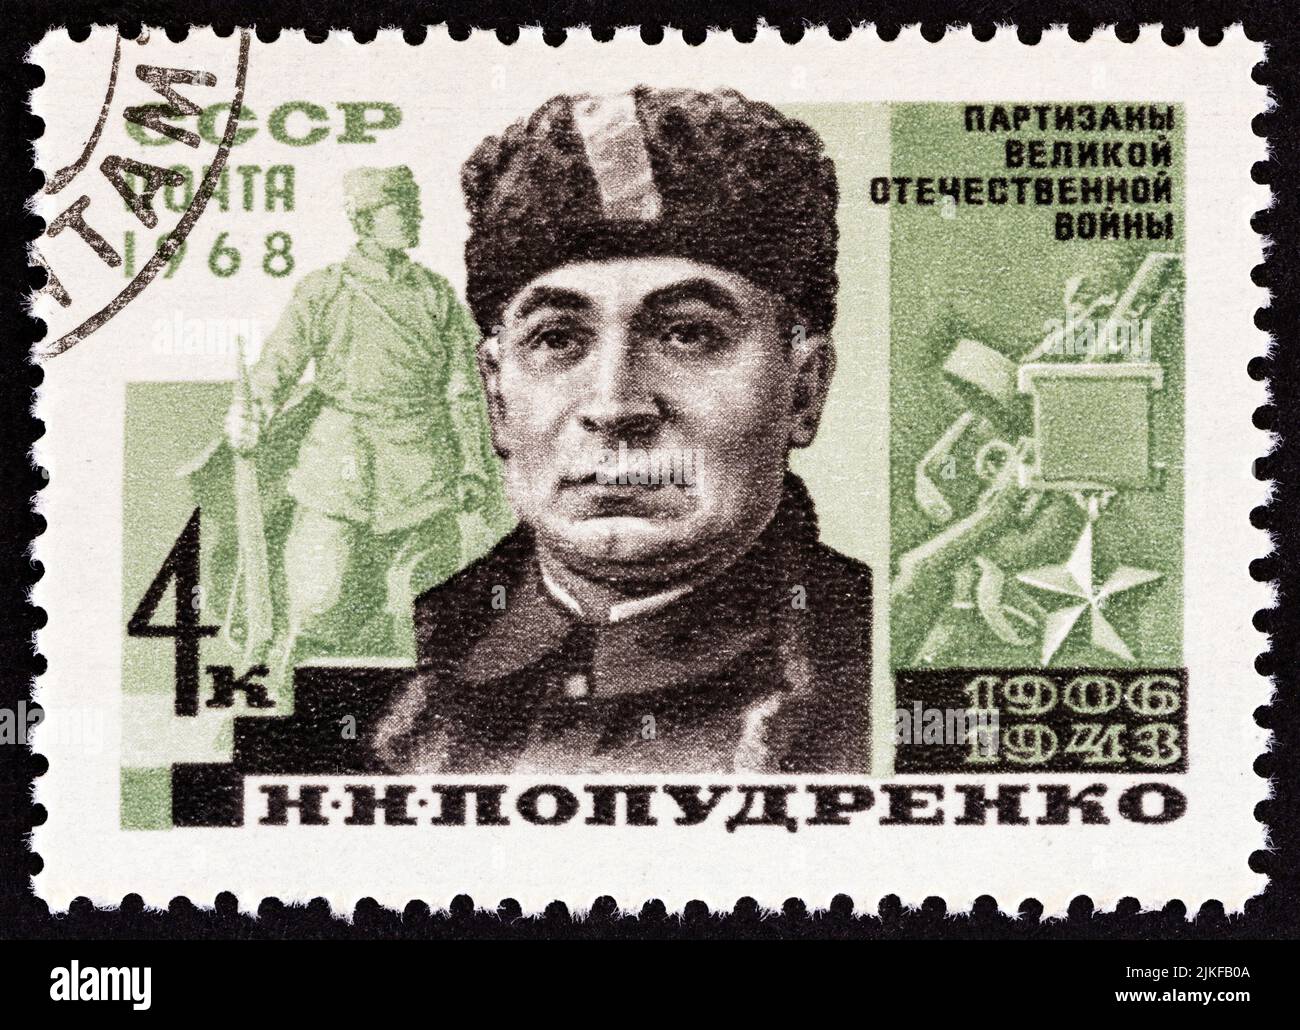 USSR - CIRCA 1968: A stamp printed in USSR from the "War Heroes" issue shows N. N. Popudrenko (1906-1943), circa 1968. Stock Photo